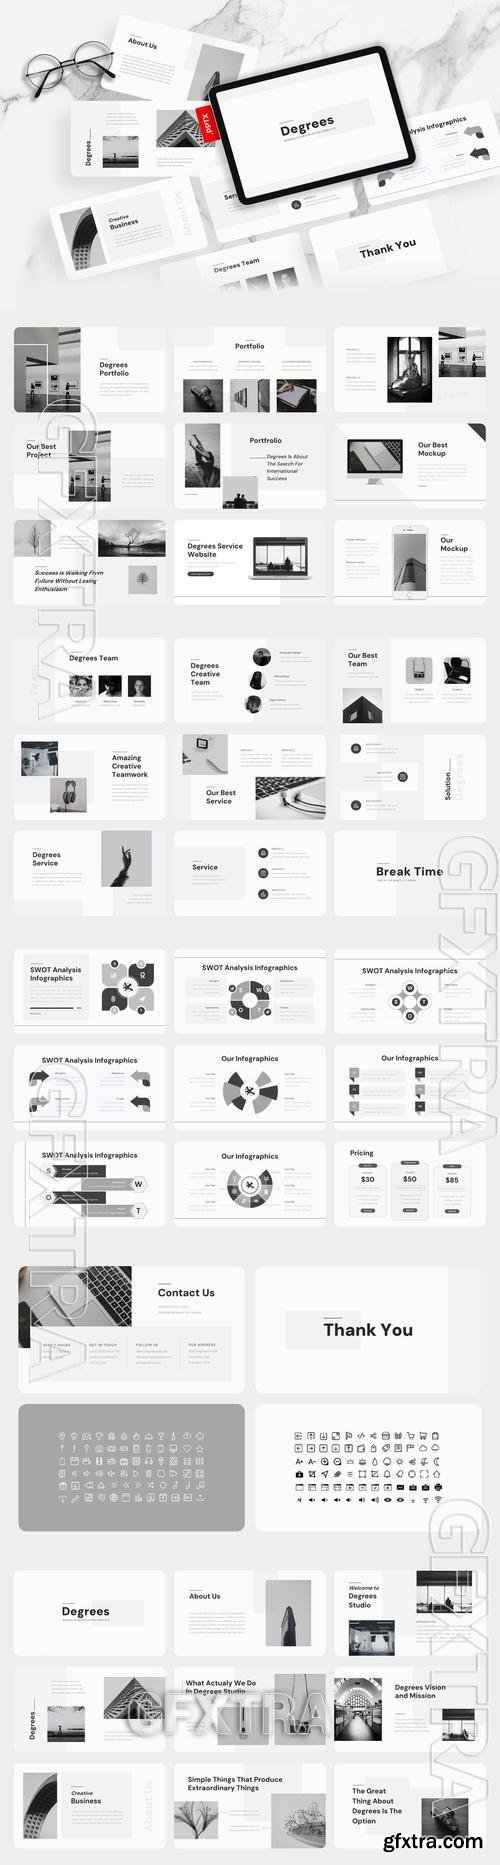 Degrees - Minimal PowerPoint Template TRQAP5H